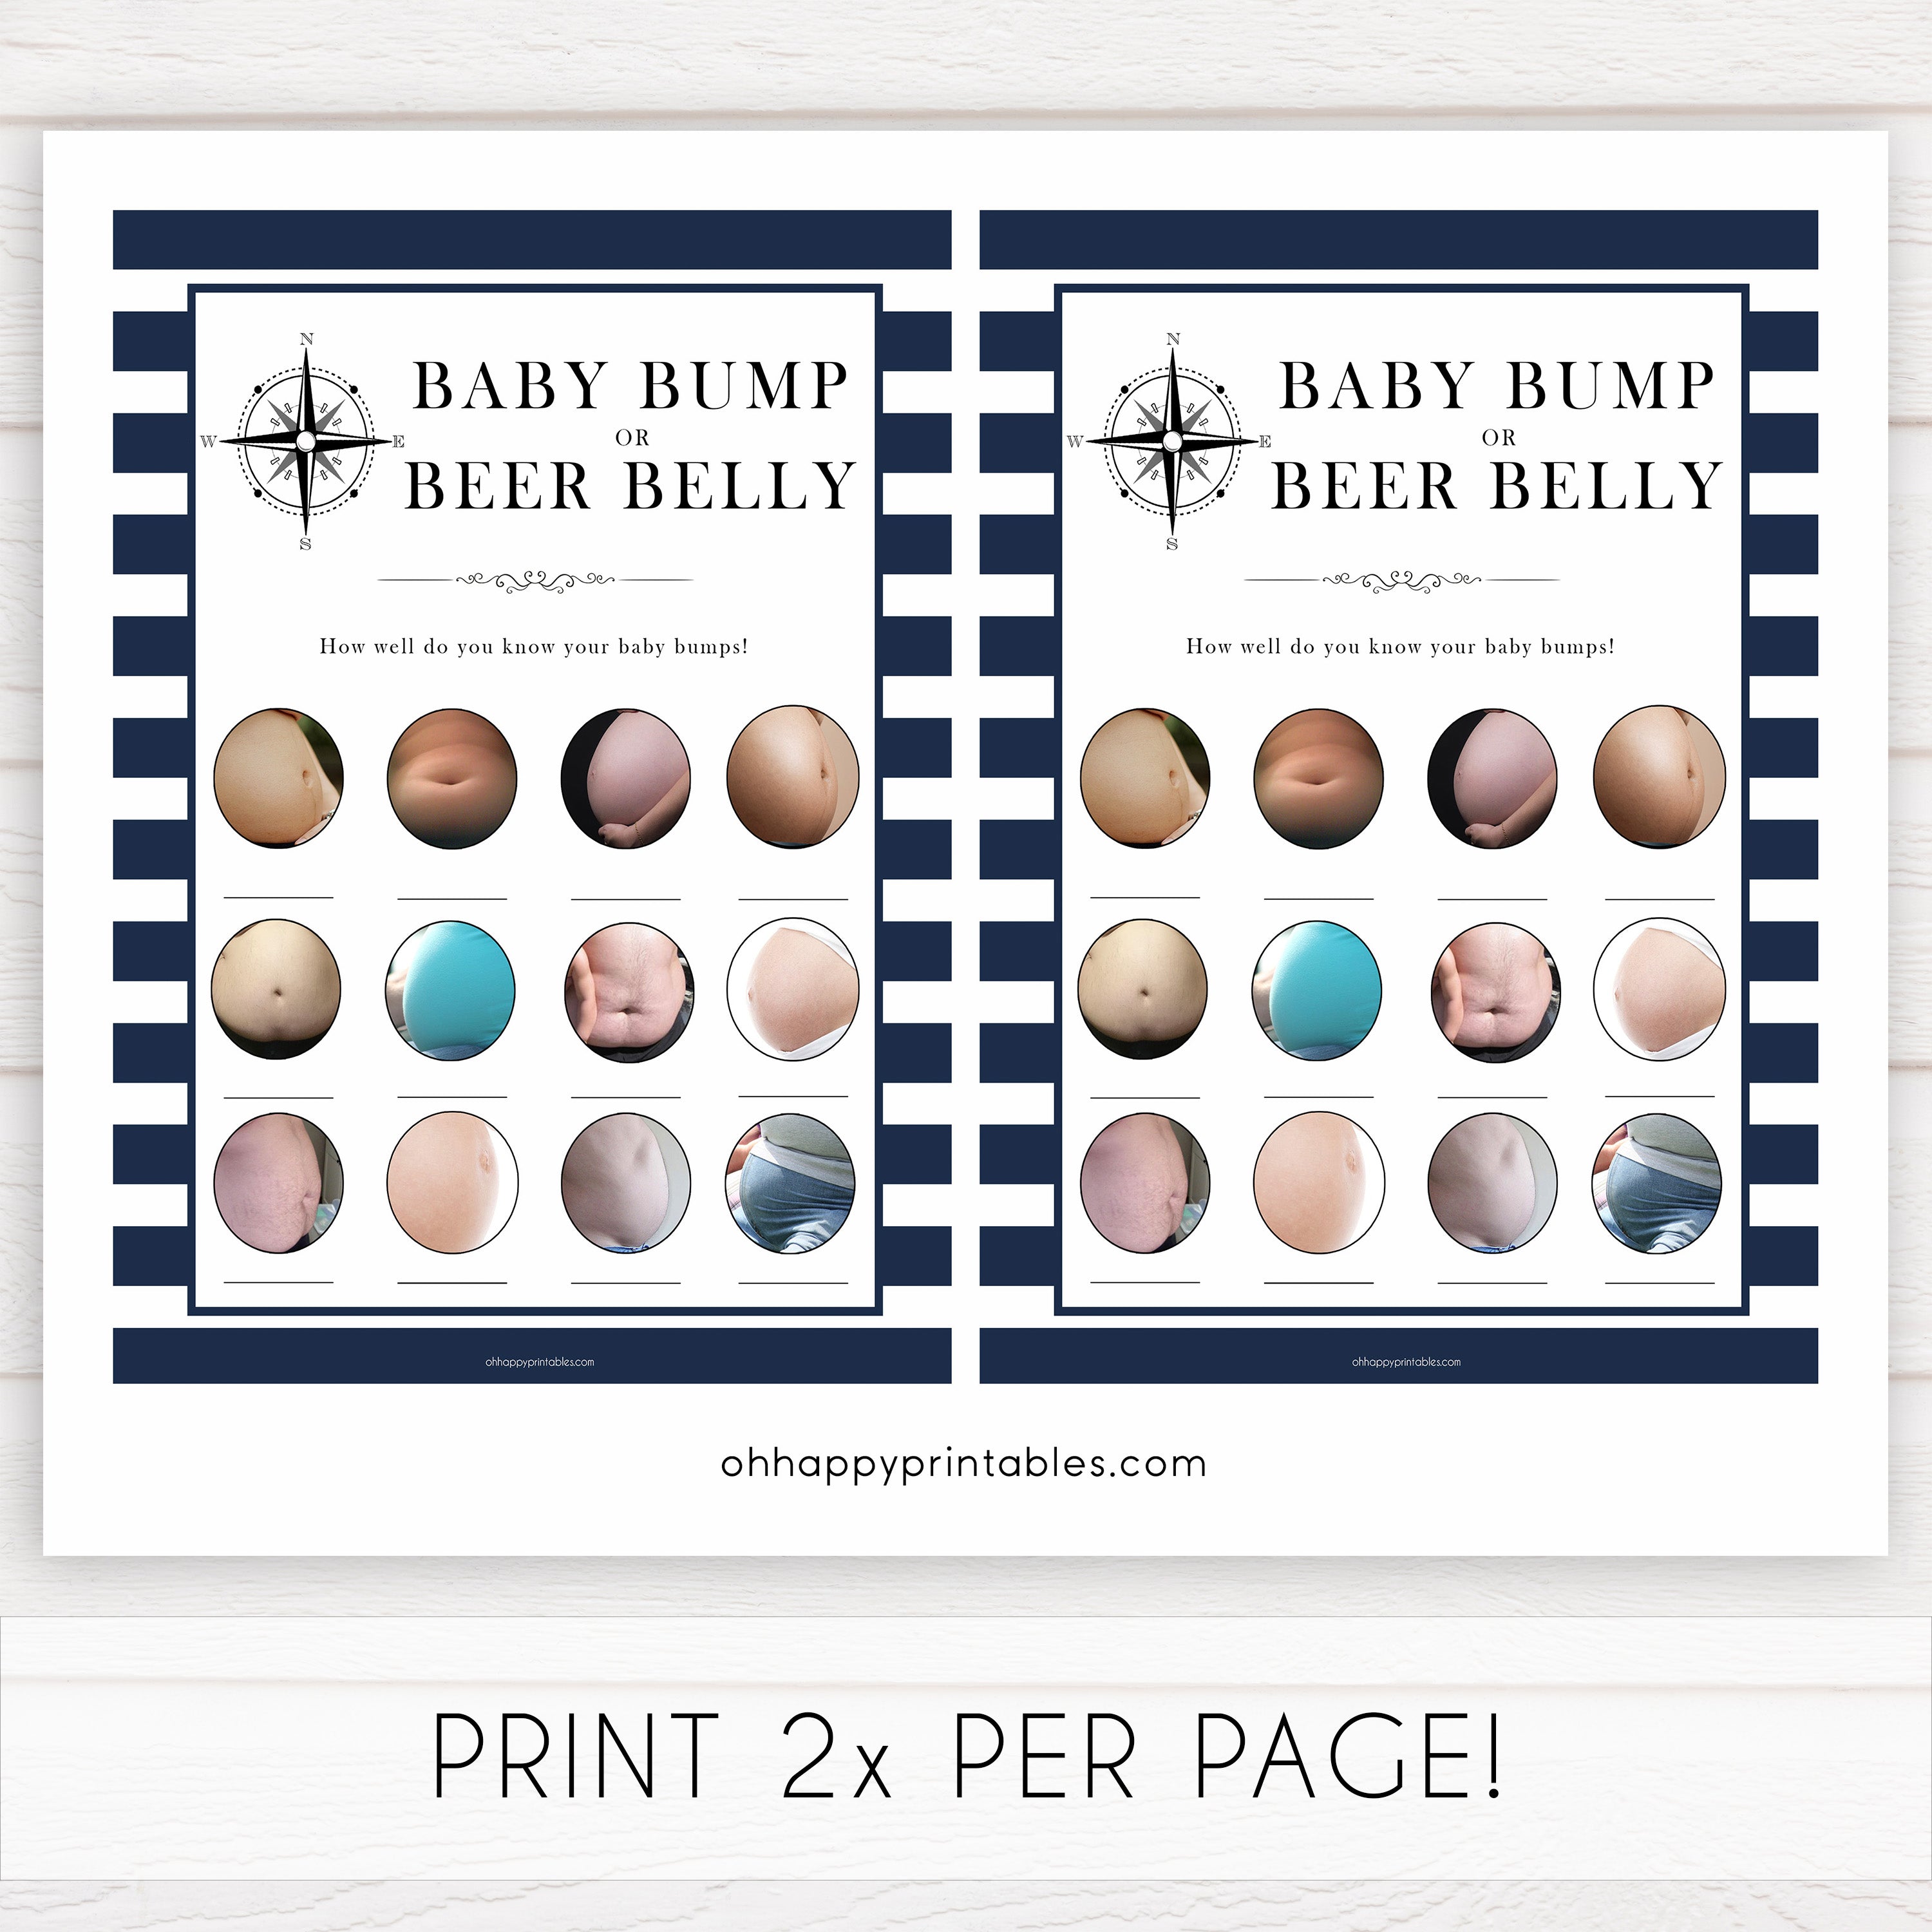 Nautical baby shower games, baby bump or beer belly baby shower games, printable baby shower games, baby shower games, fun baby games, popular baby shower games, sailor baby games, boat baby games